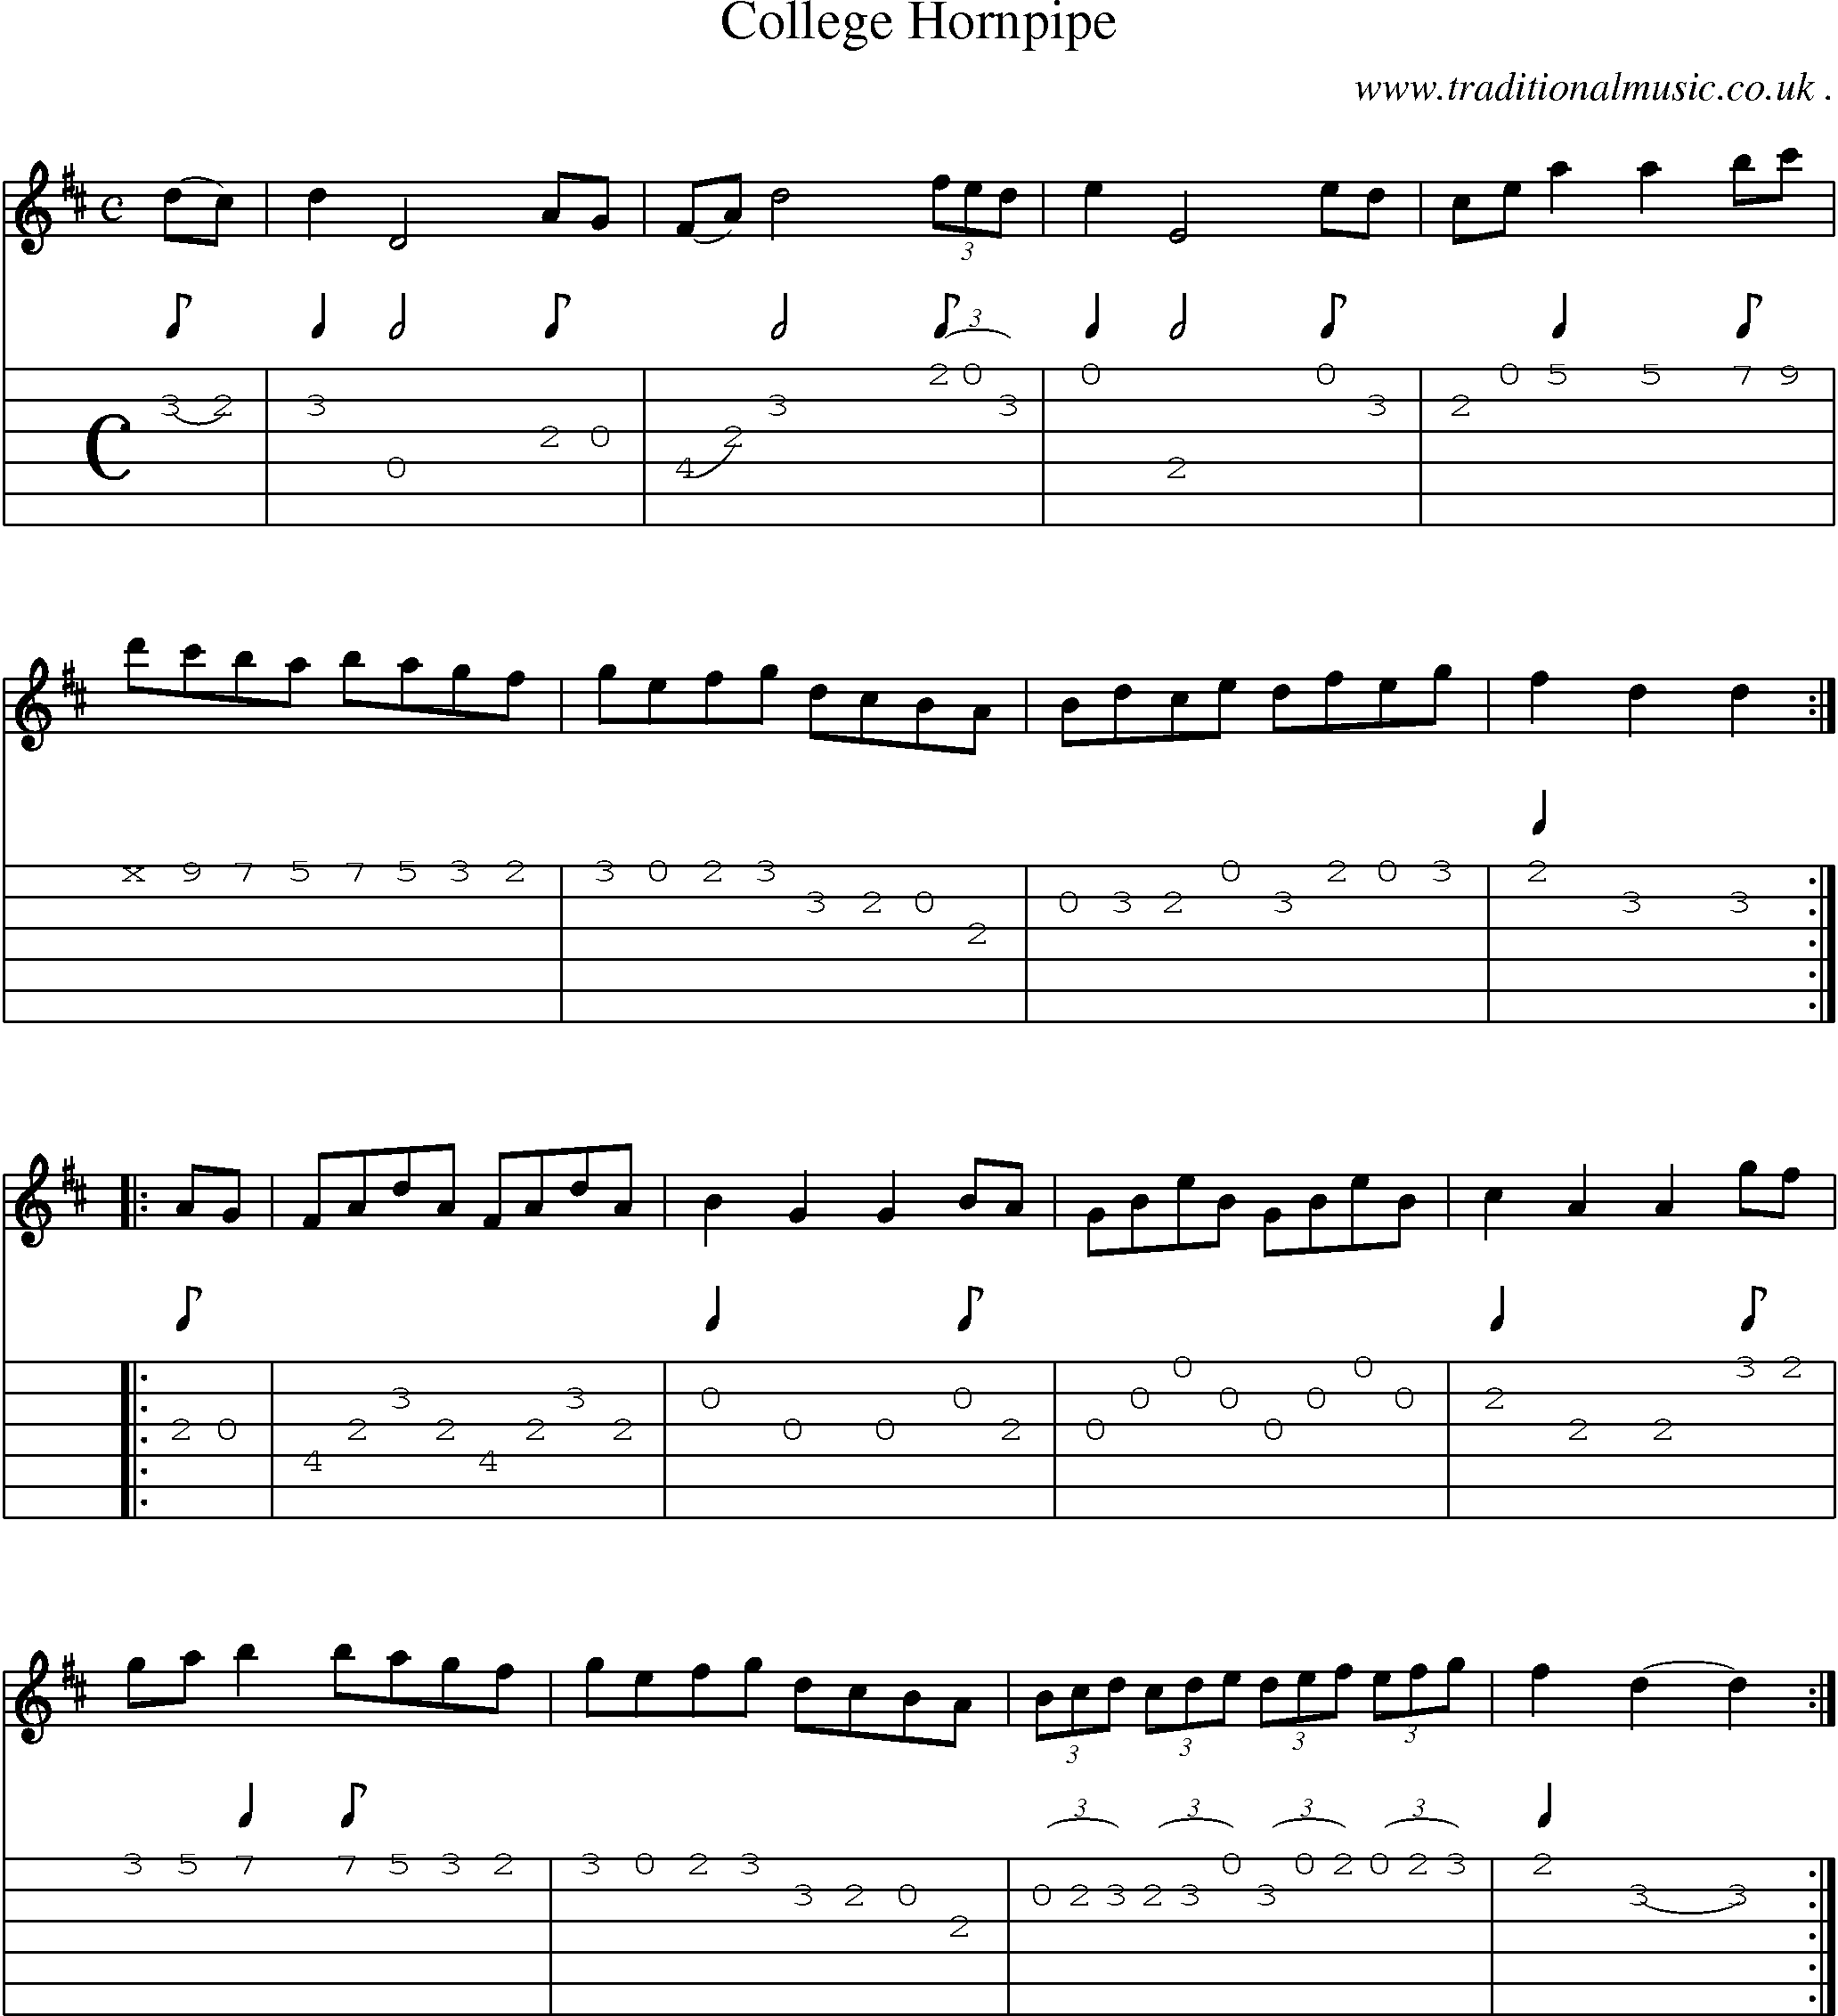 Sheet-Music and Guitar Tabs for College Hornpipe